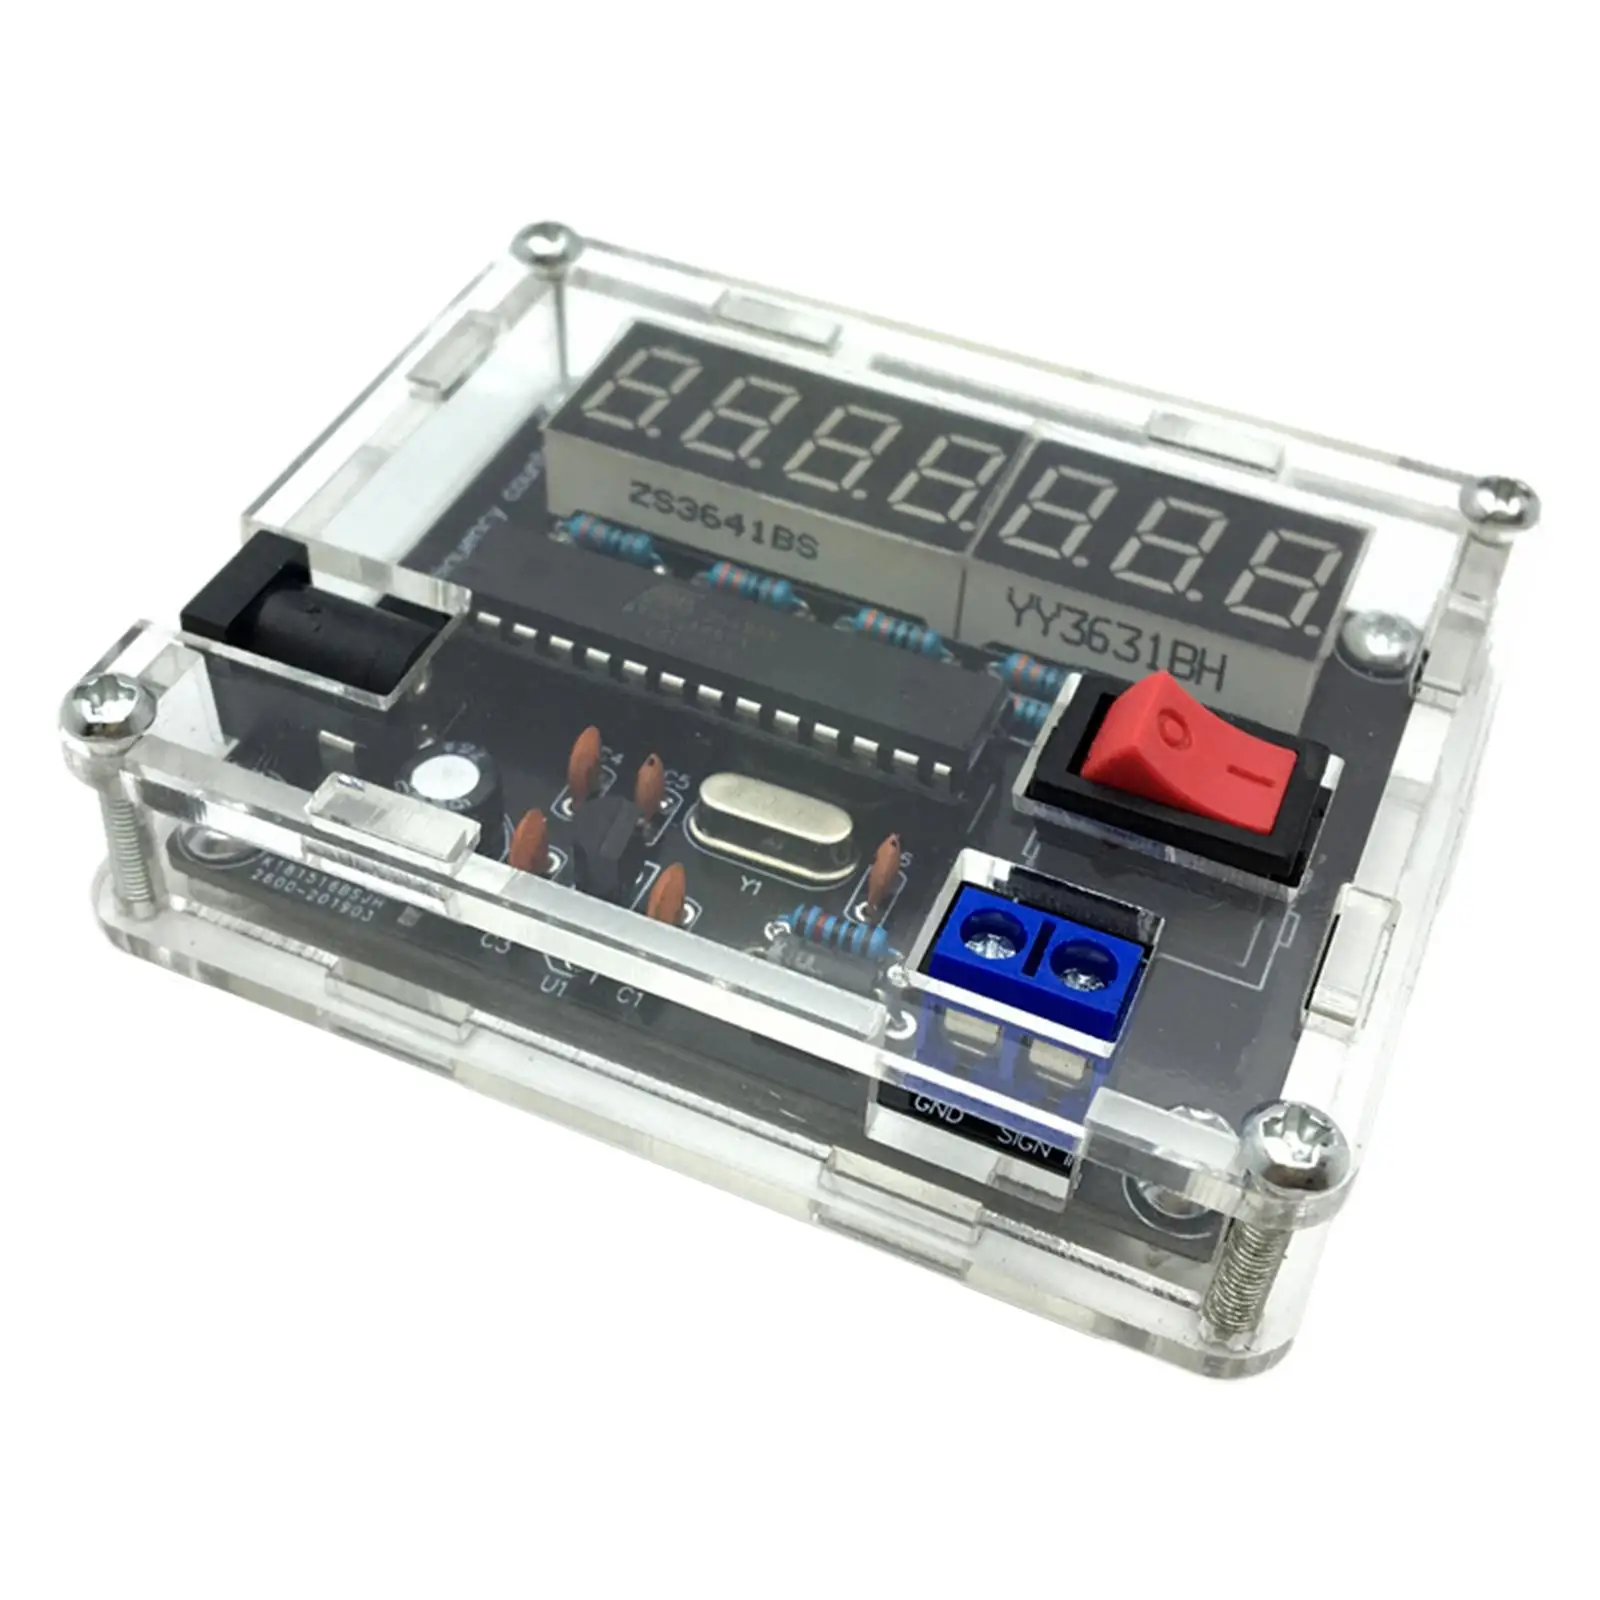 5-12V Frequency Tester with Acrylic Case 0.000 001Hz Resolution Measurement Oscillator Tester 10MHz